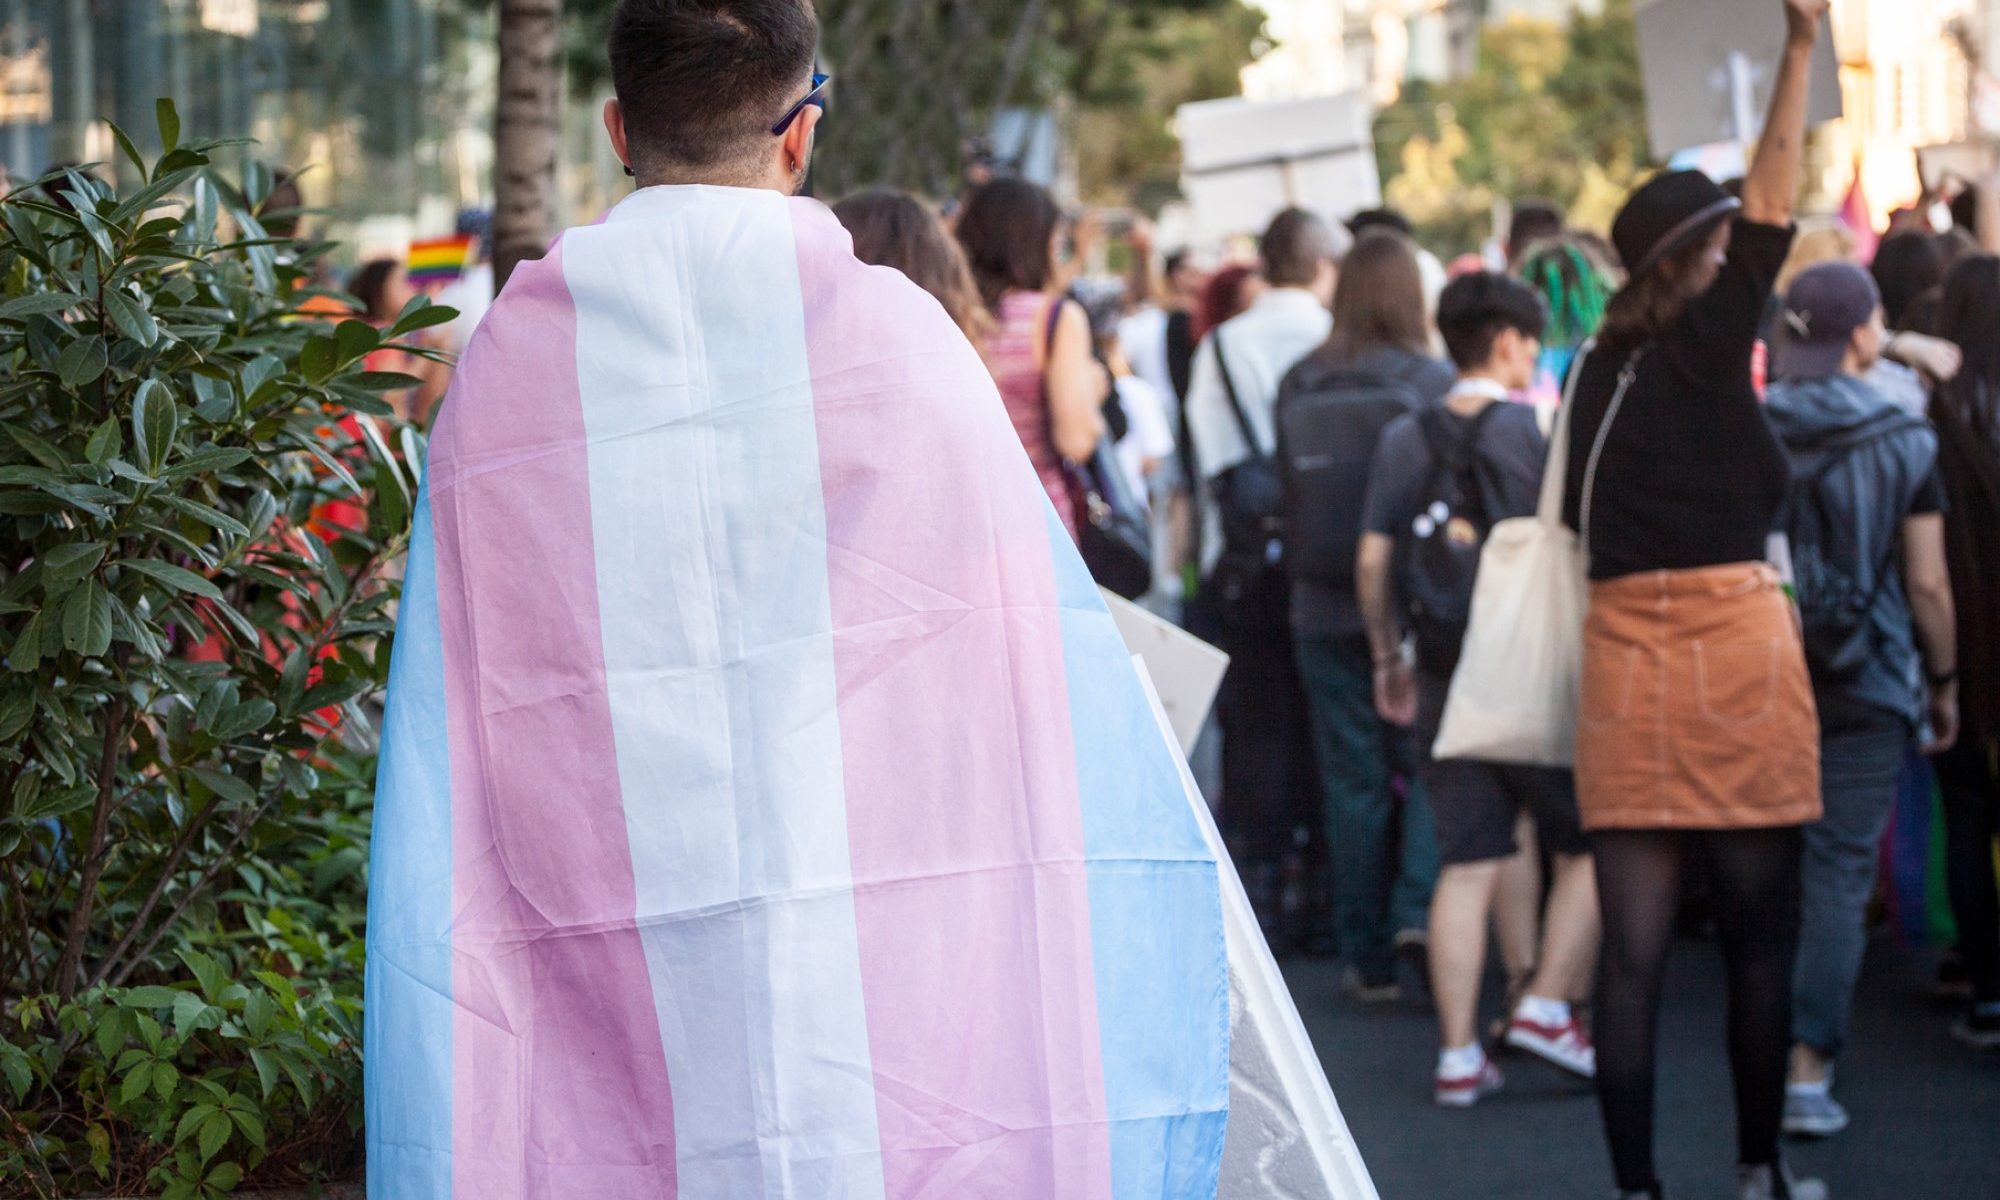 photograph of person walking through crowd draped in transgender flag